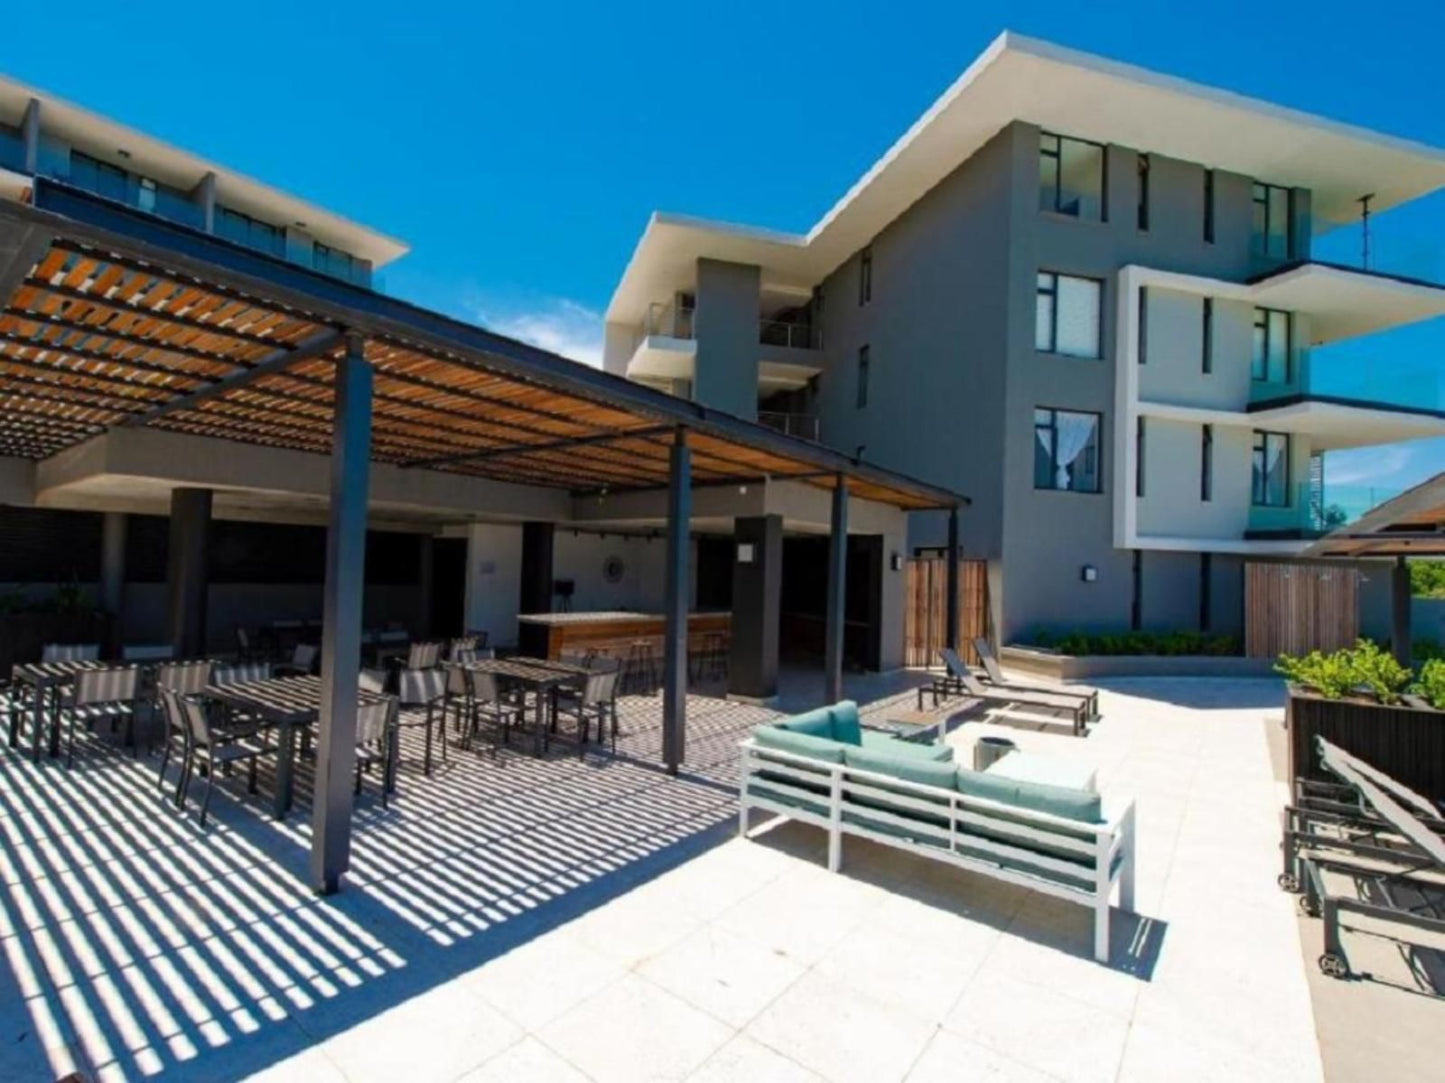 Coral Point Apartment E110 Hillhead Umhlanga Kwazulu Natal South Africa House, Building, Architecture, Swimming Pool